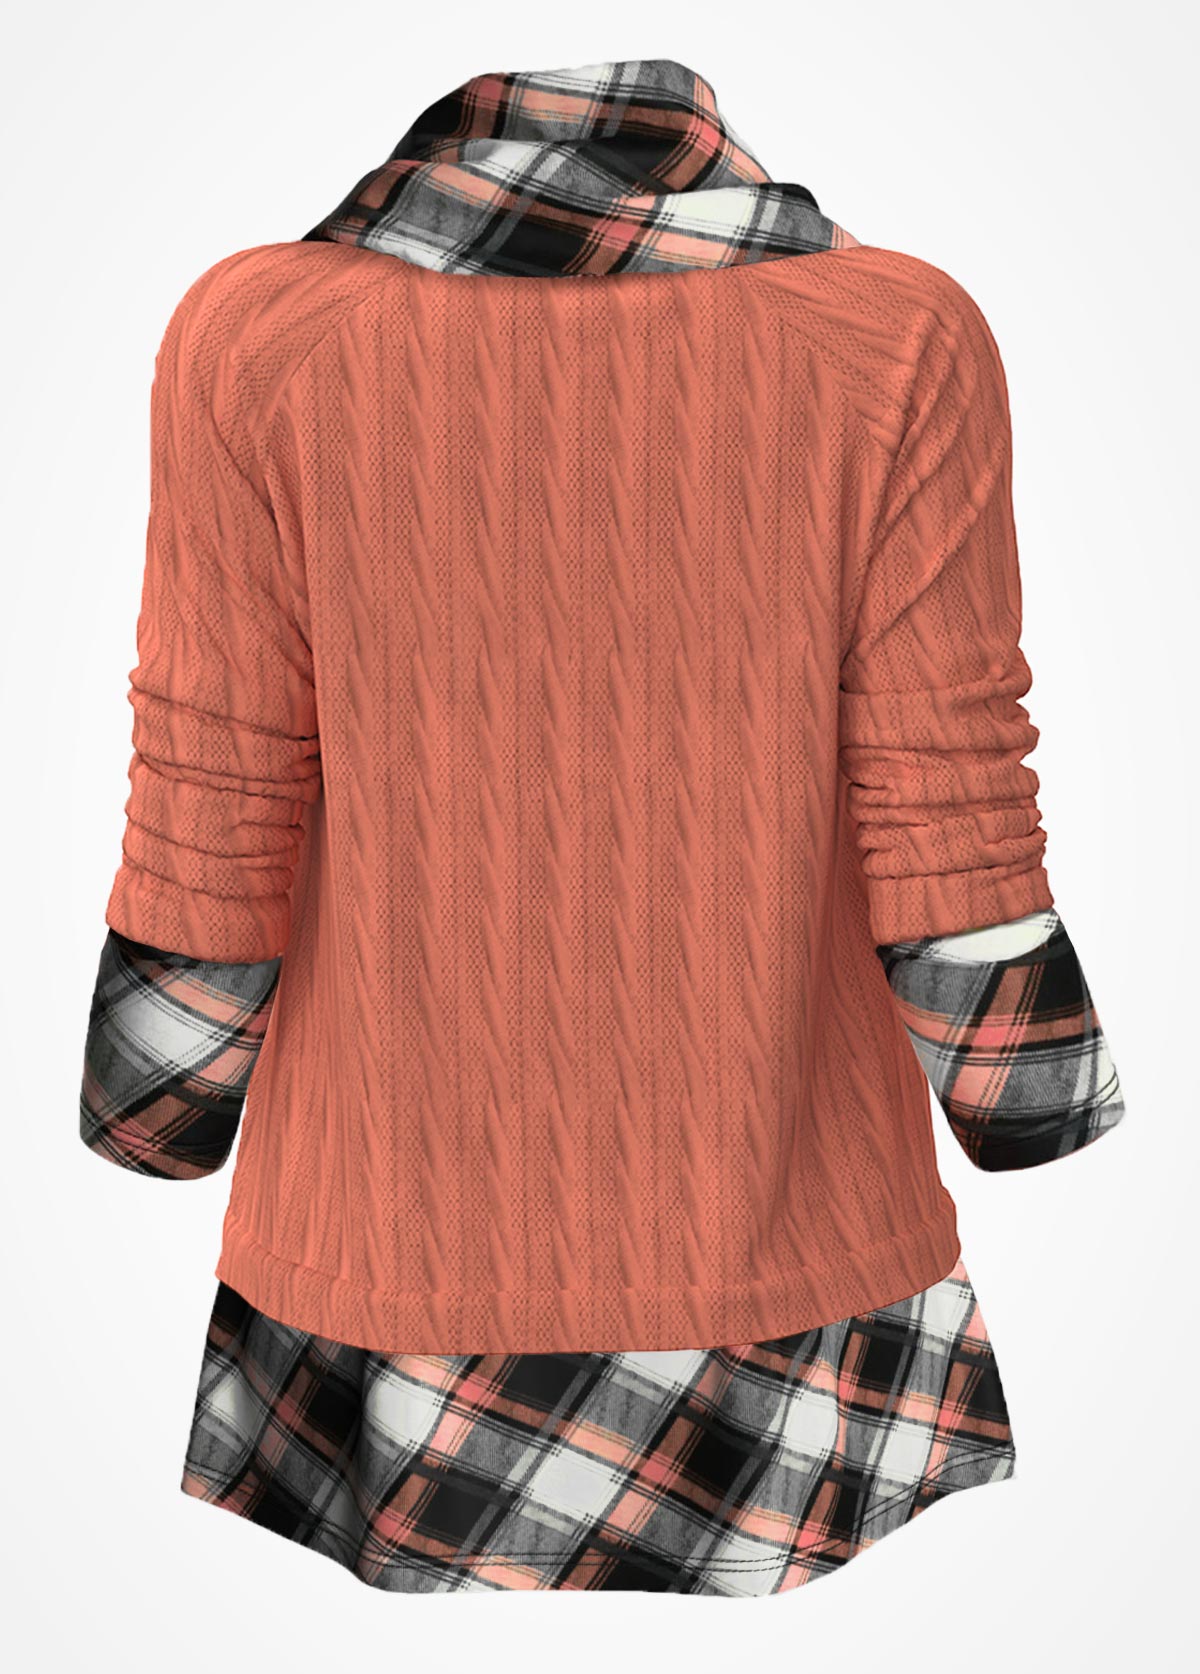 Plaid Fabric Splicing Long Sleeve Cowl Neck Sweater